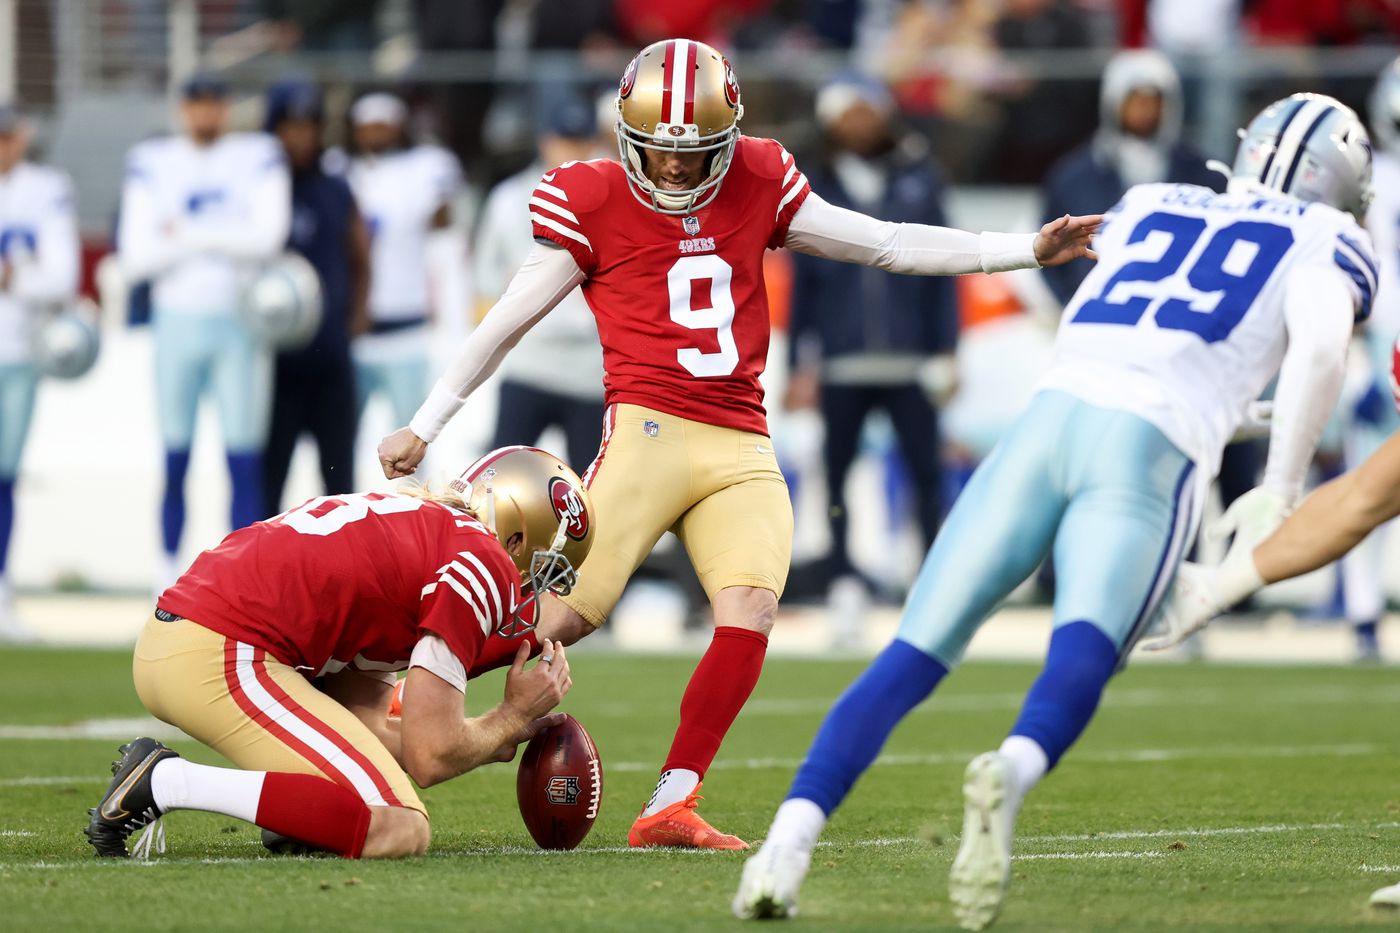 If the Cowboys make a change at kicker, they should pursue San Franciscoâ€™s Robbie Gould